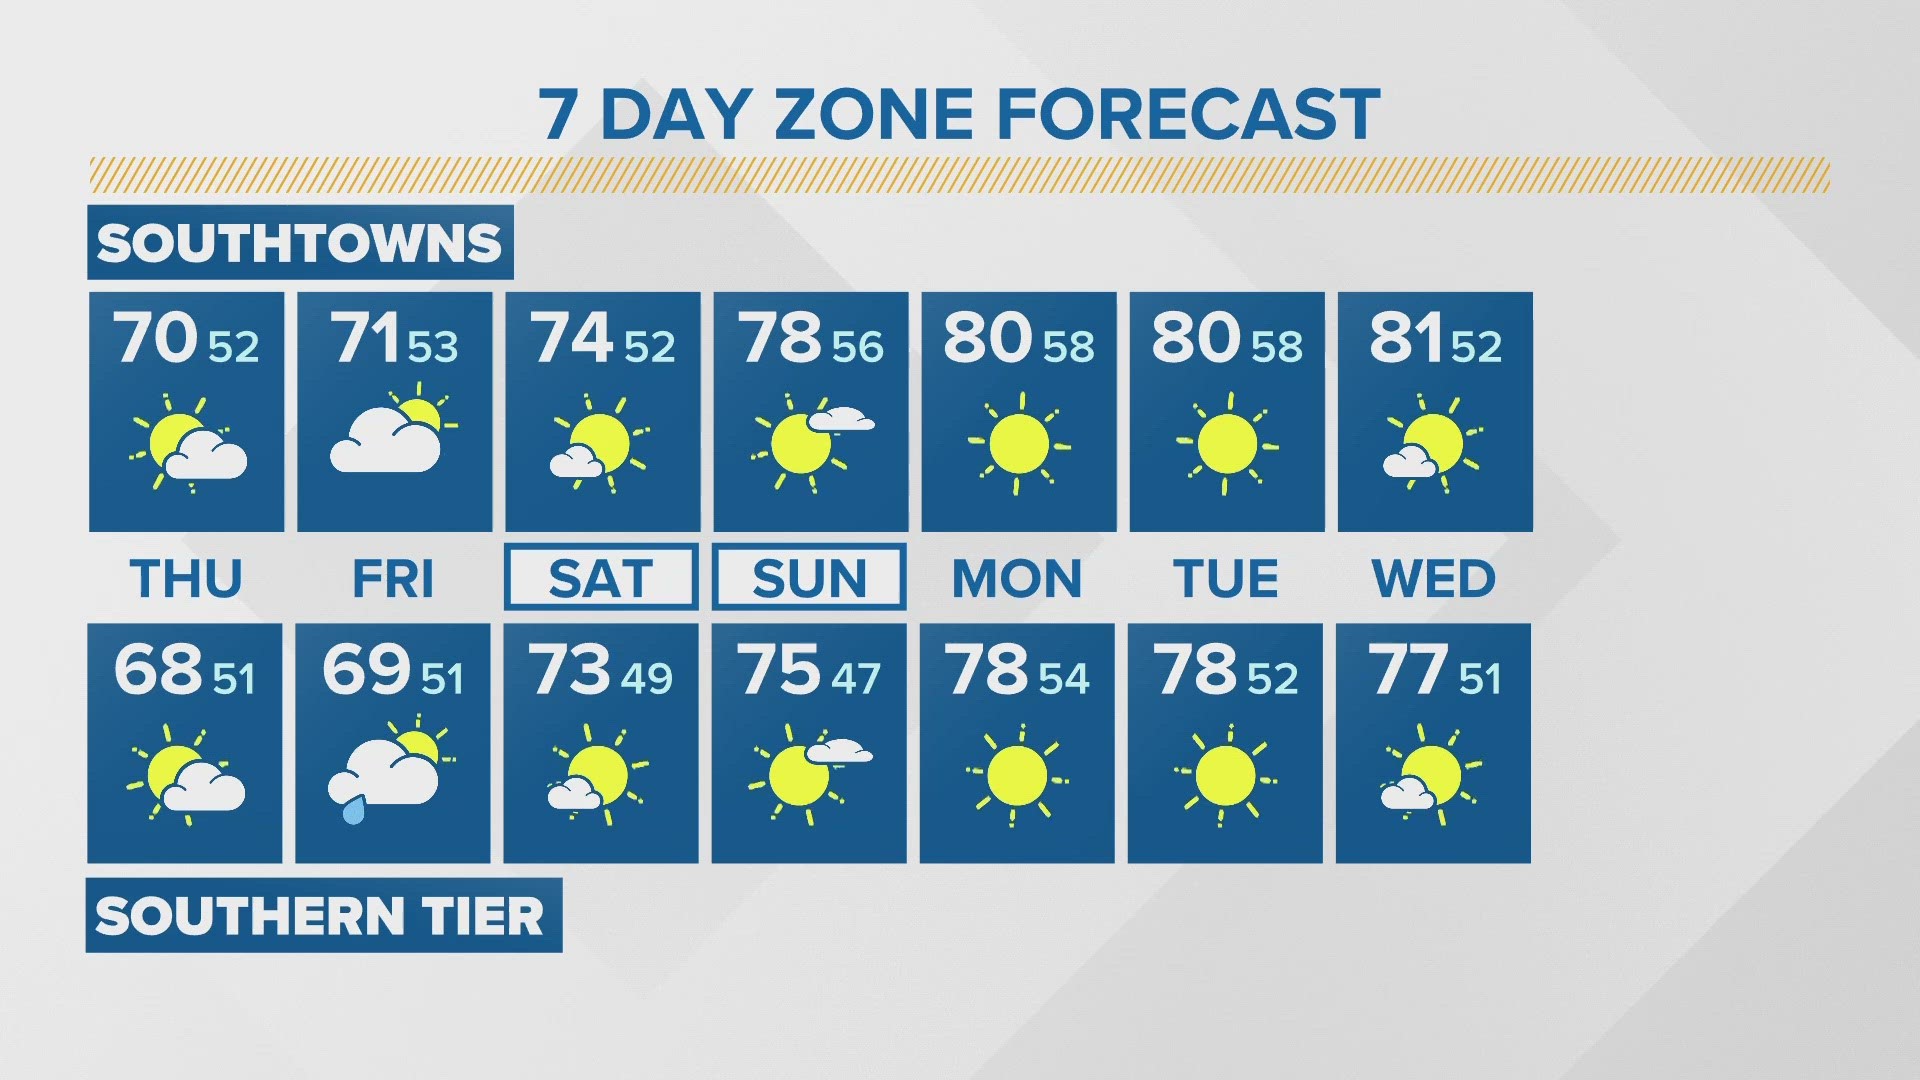 Patrick has a look at your seven day zone forecast, which includes 3 straight 80 degrees day.